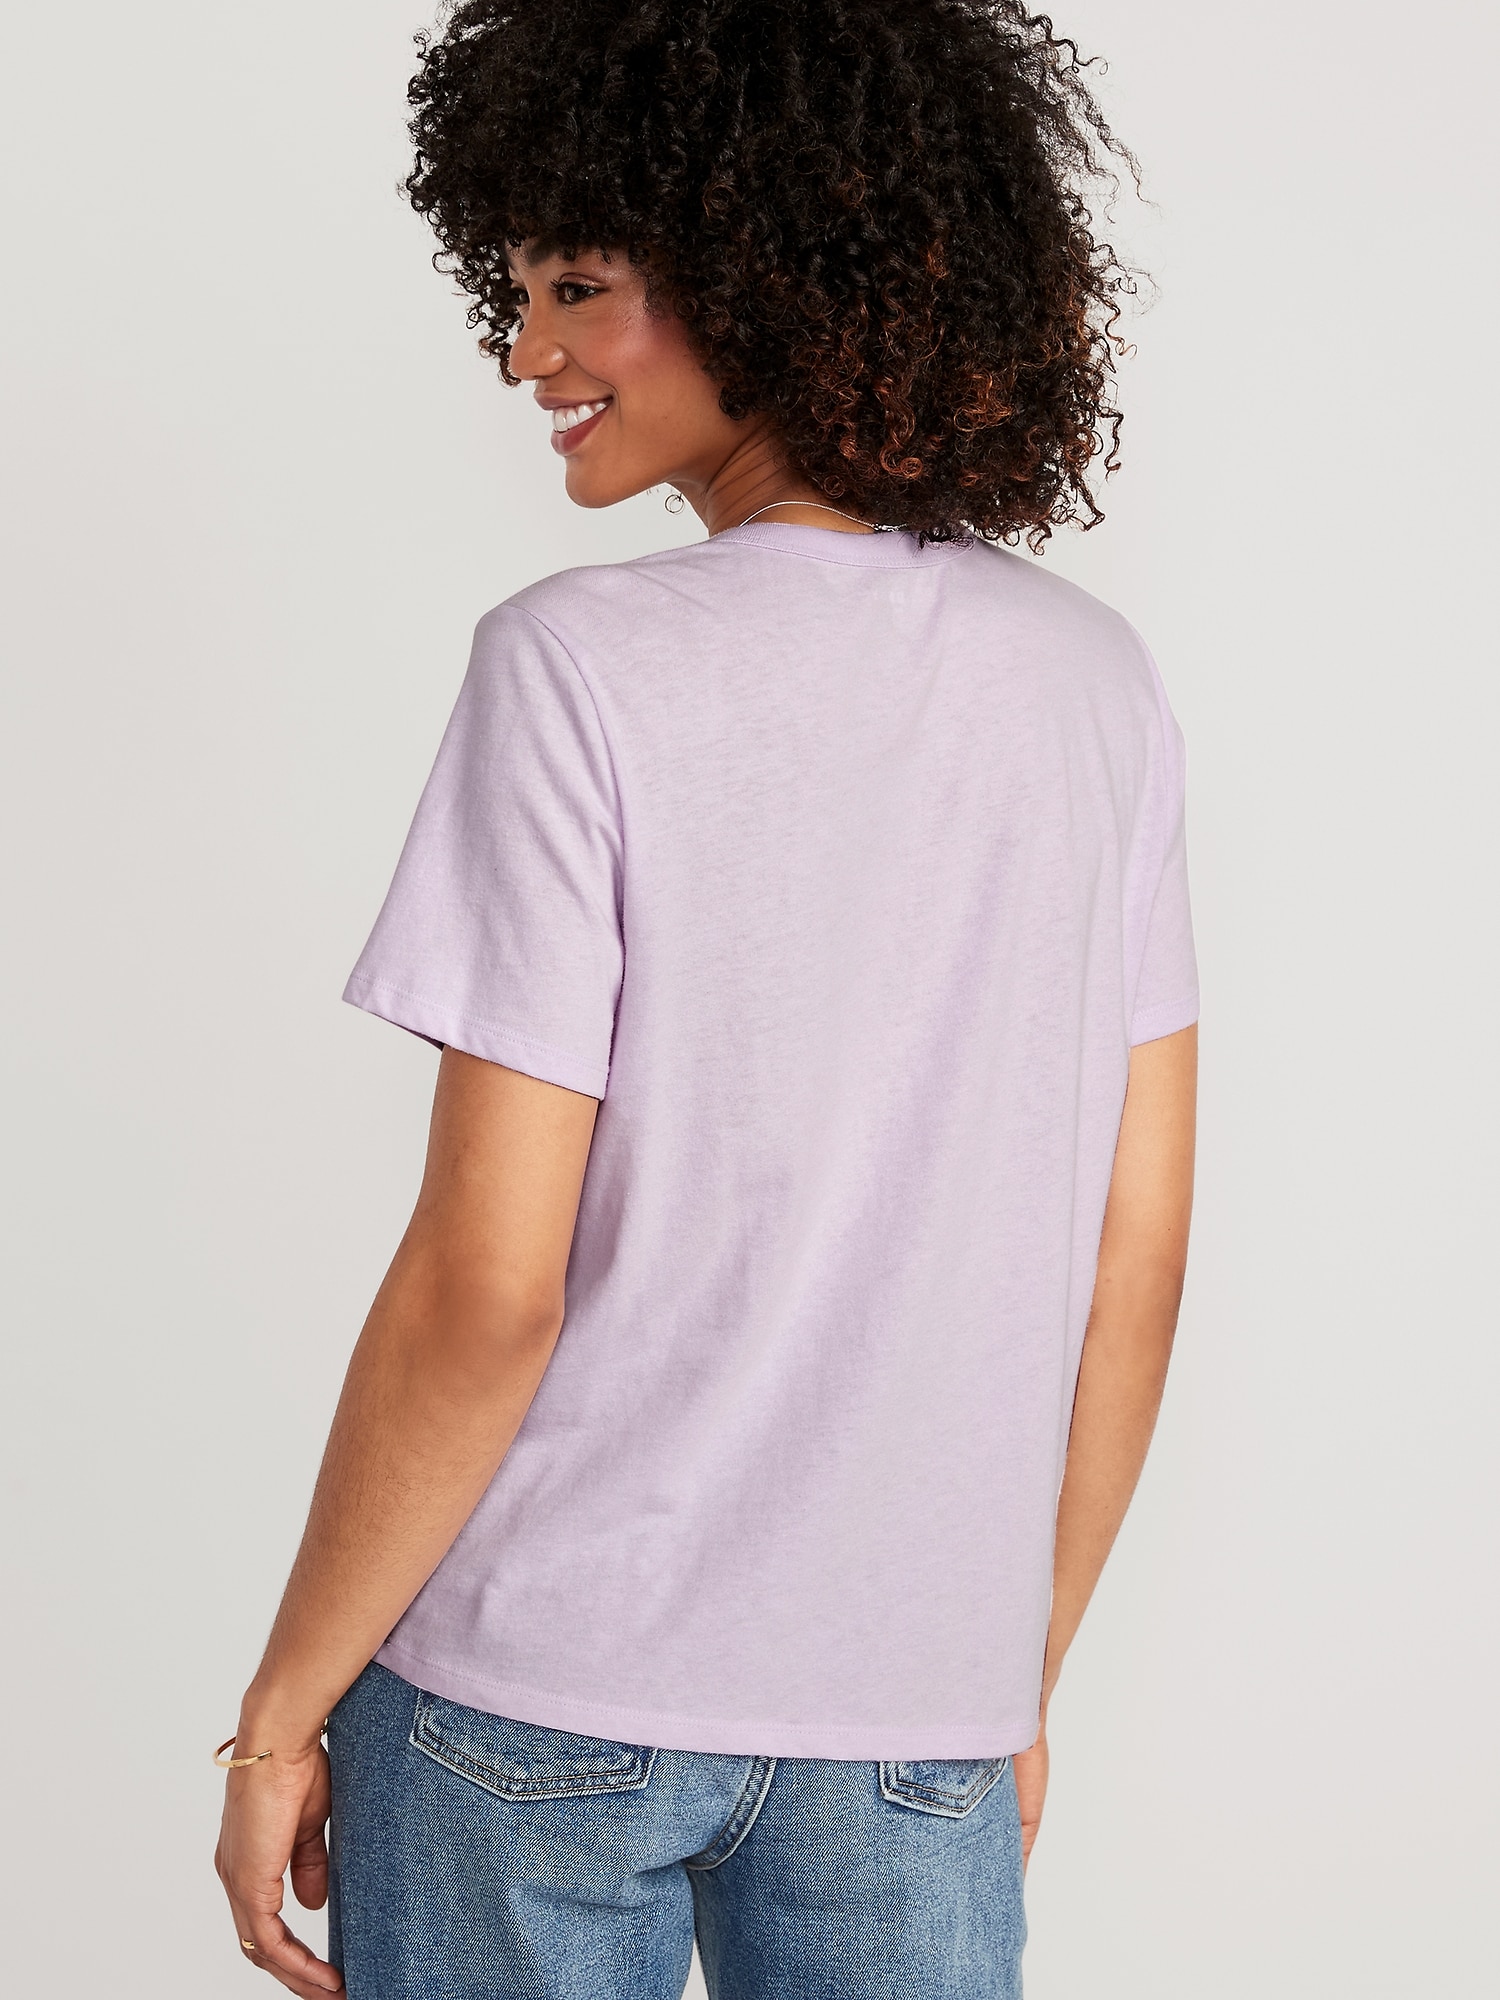 EveryWear Graphic T-Shirt | Old Navy